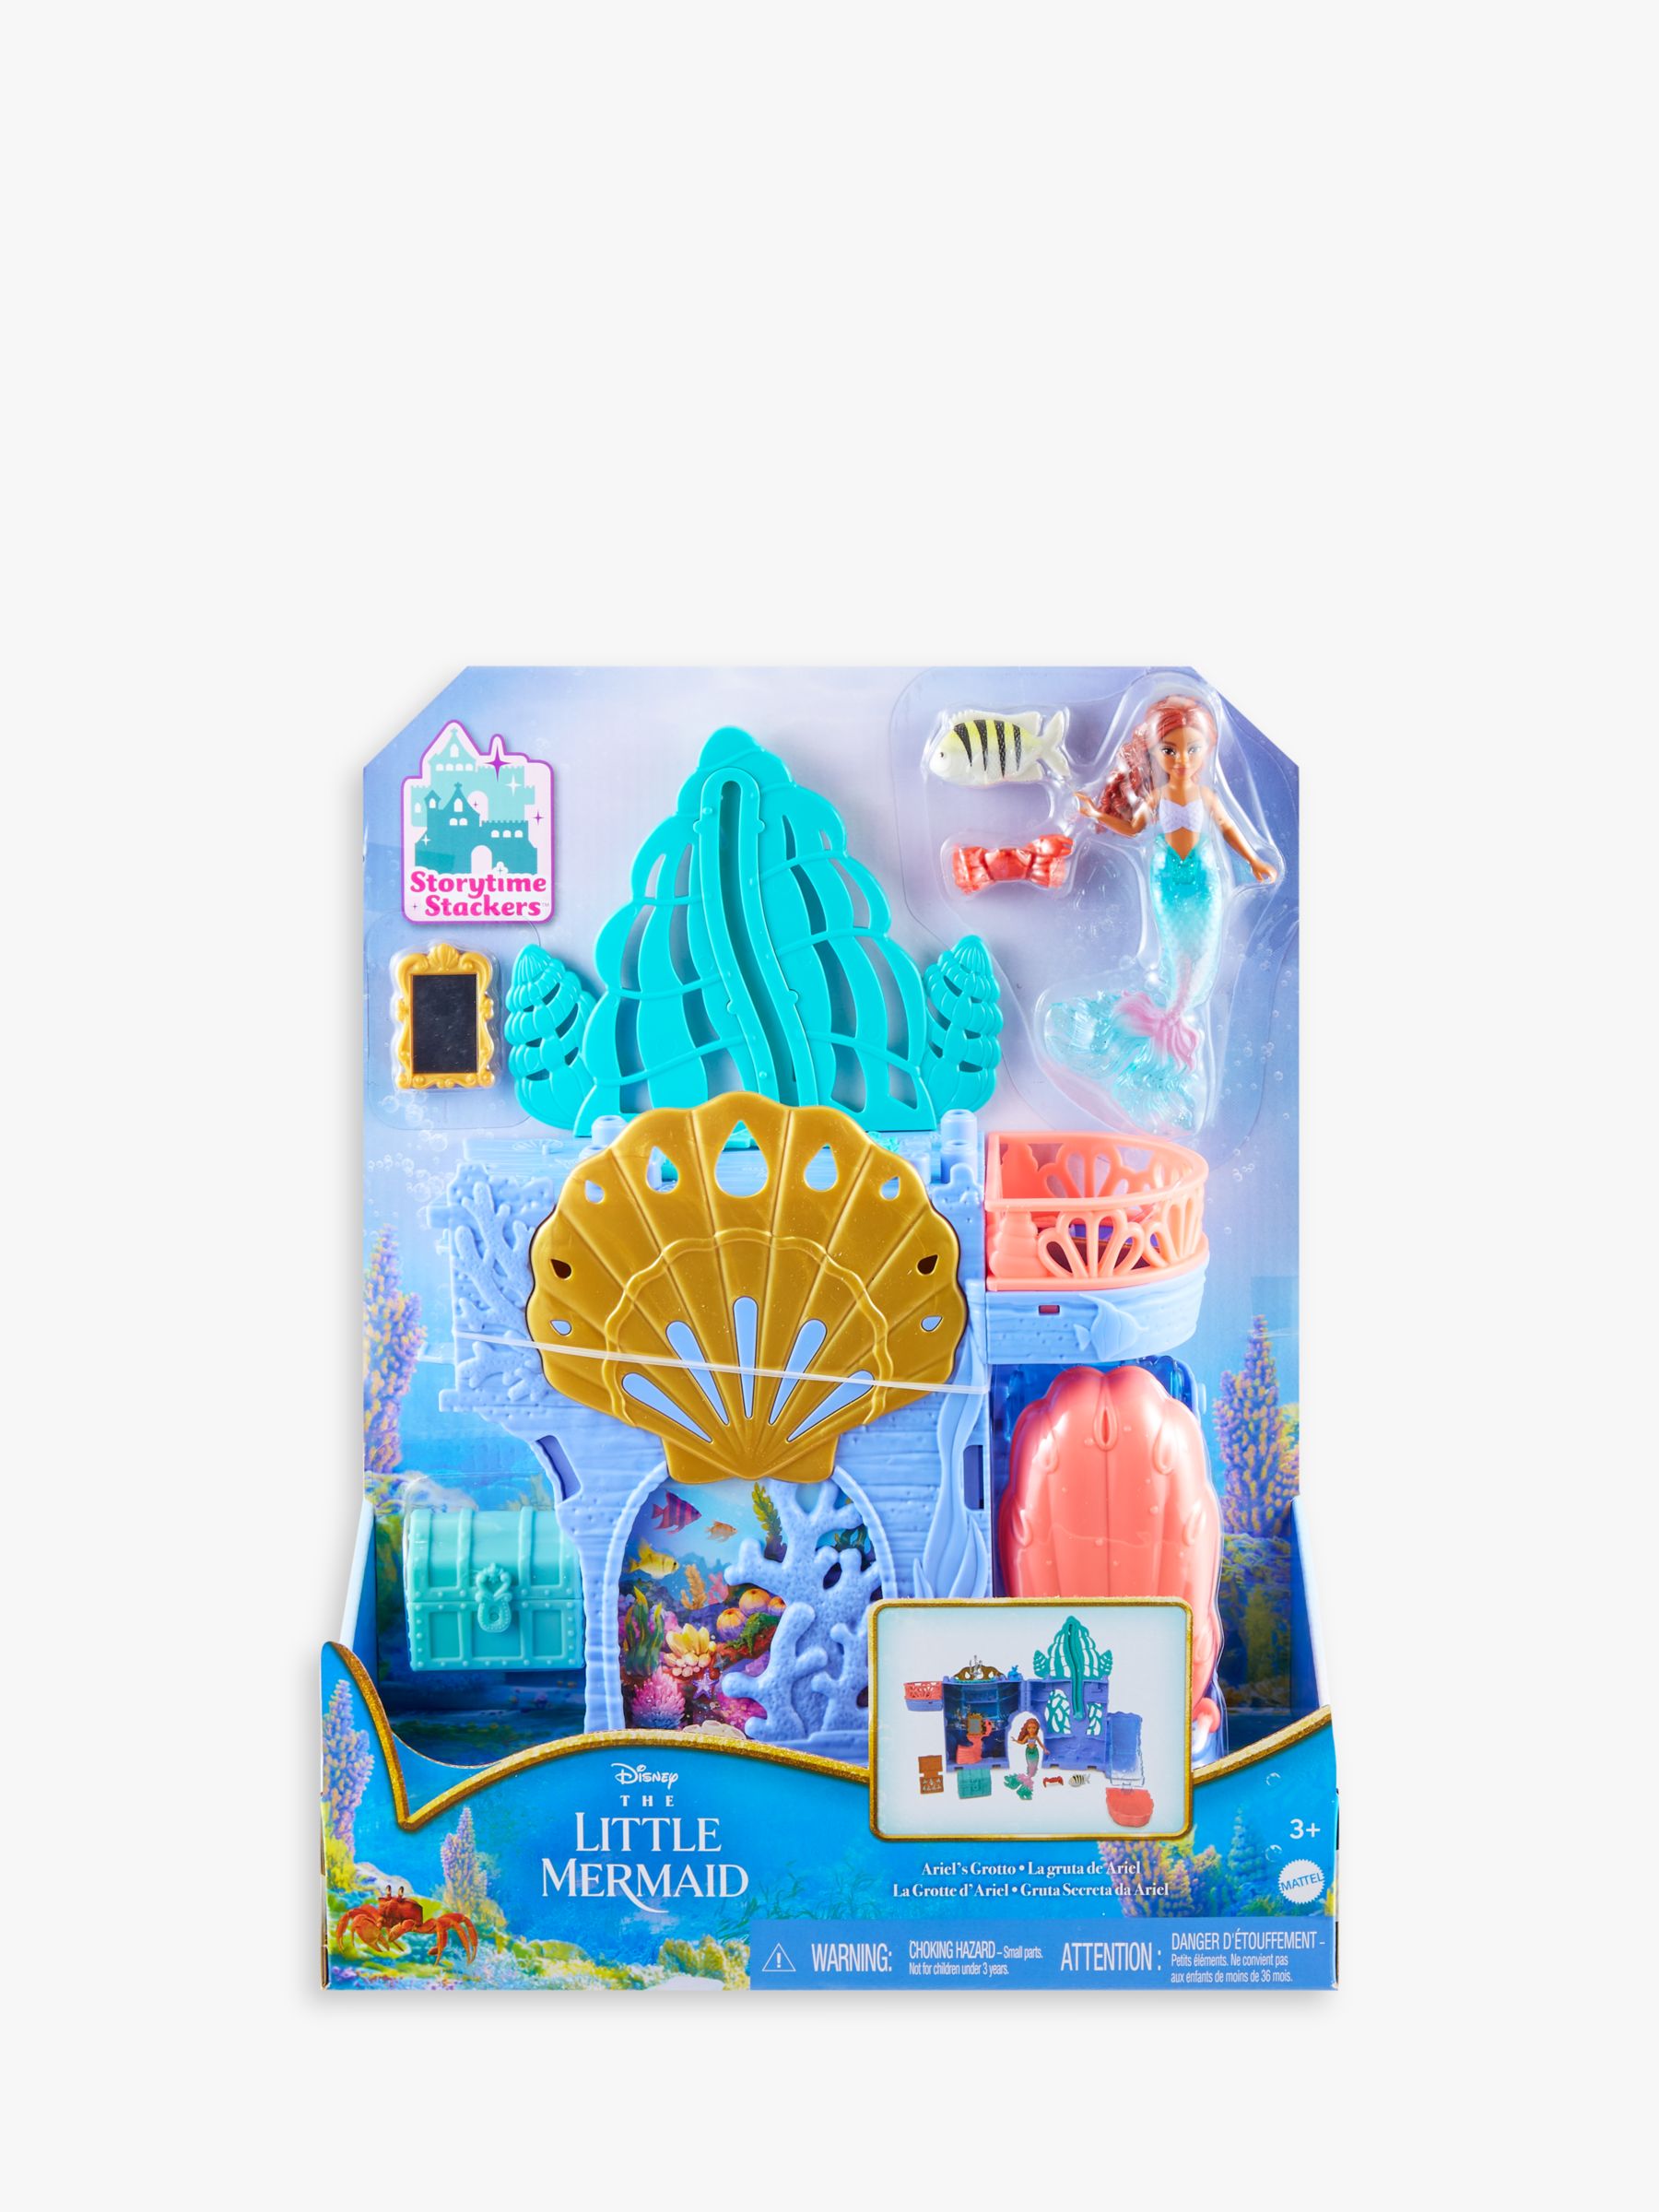 Disney The Little Mermaid Storytime Stackers Ariel's Grotto